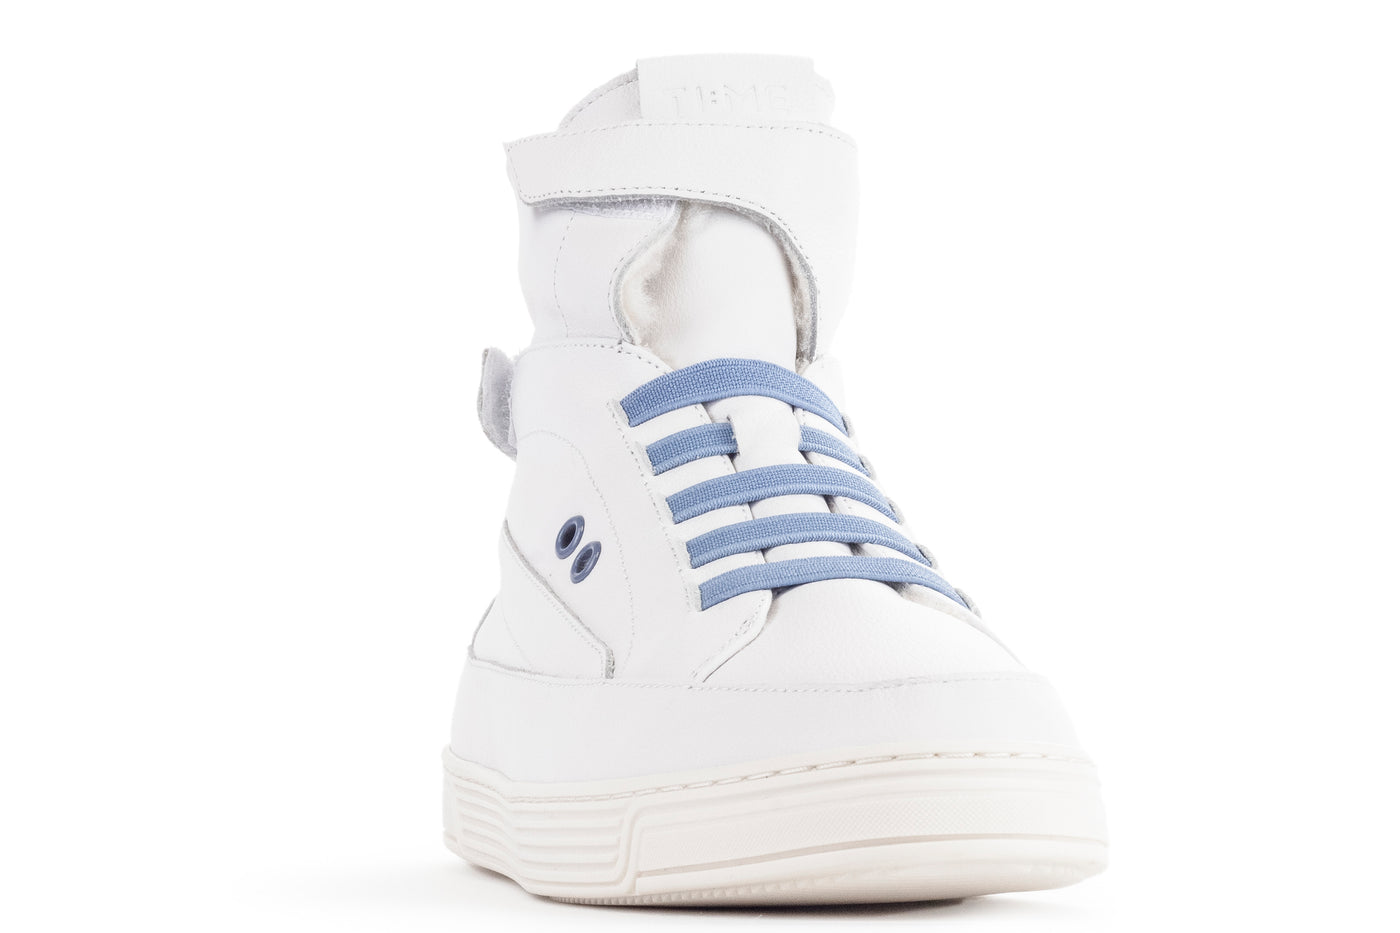 TIME Slippers-Women's Hi-top Slippers,#color_leather-white-blue